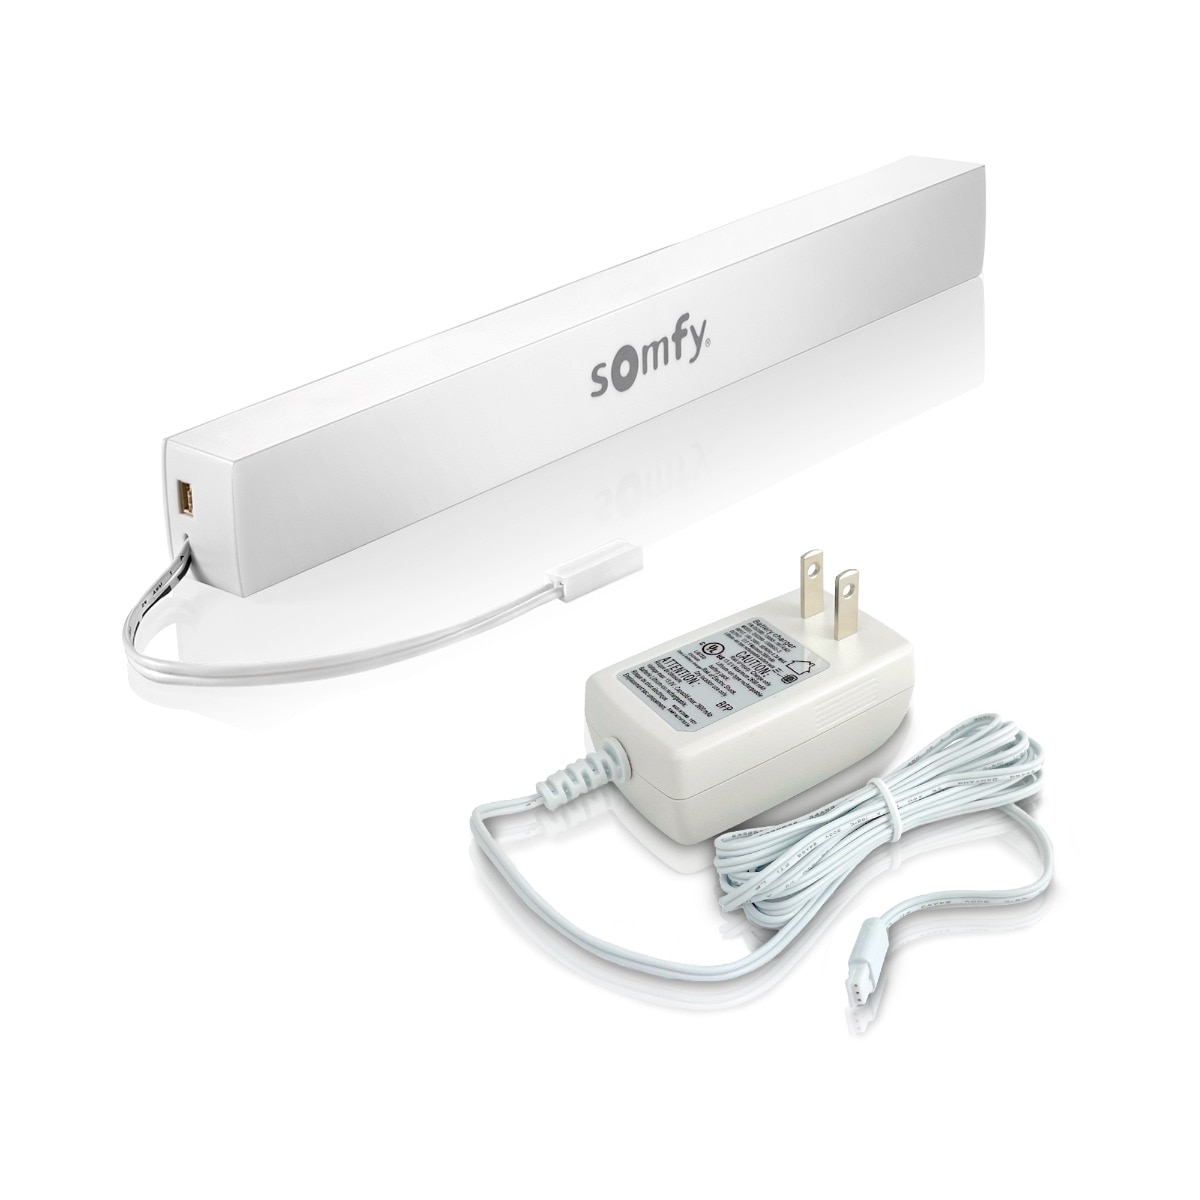 https://store.somfysystems.com/media/catalog/product/9/0/9021217-_-9025166_rechargeable-battery-pack-_-charger.jpg